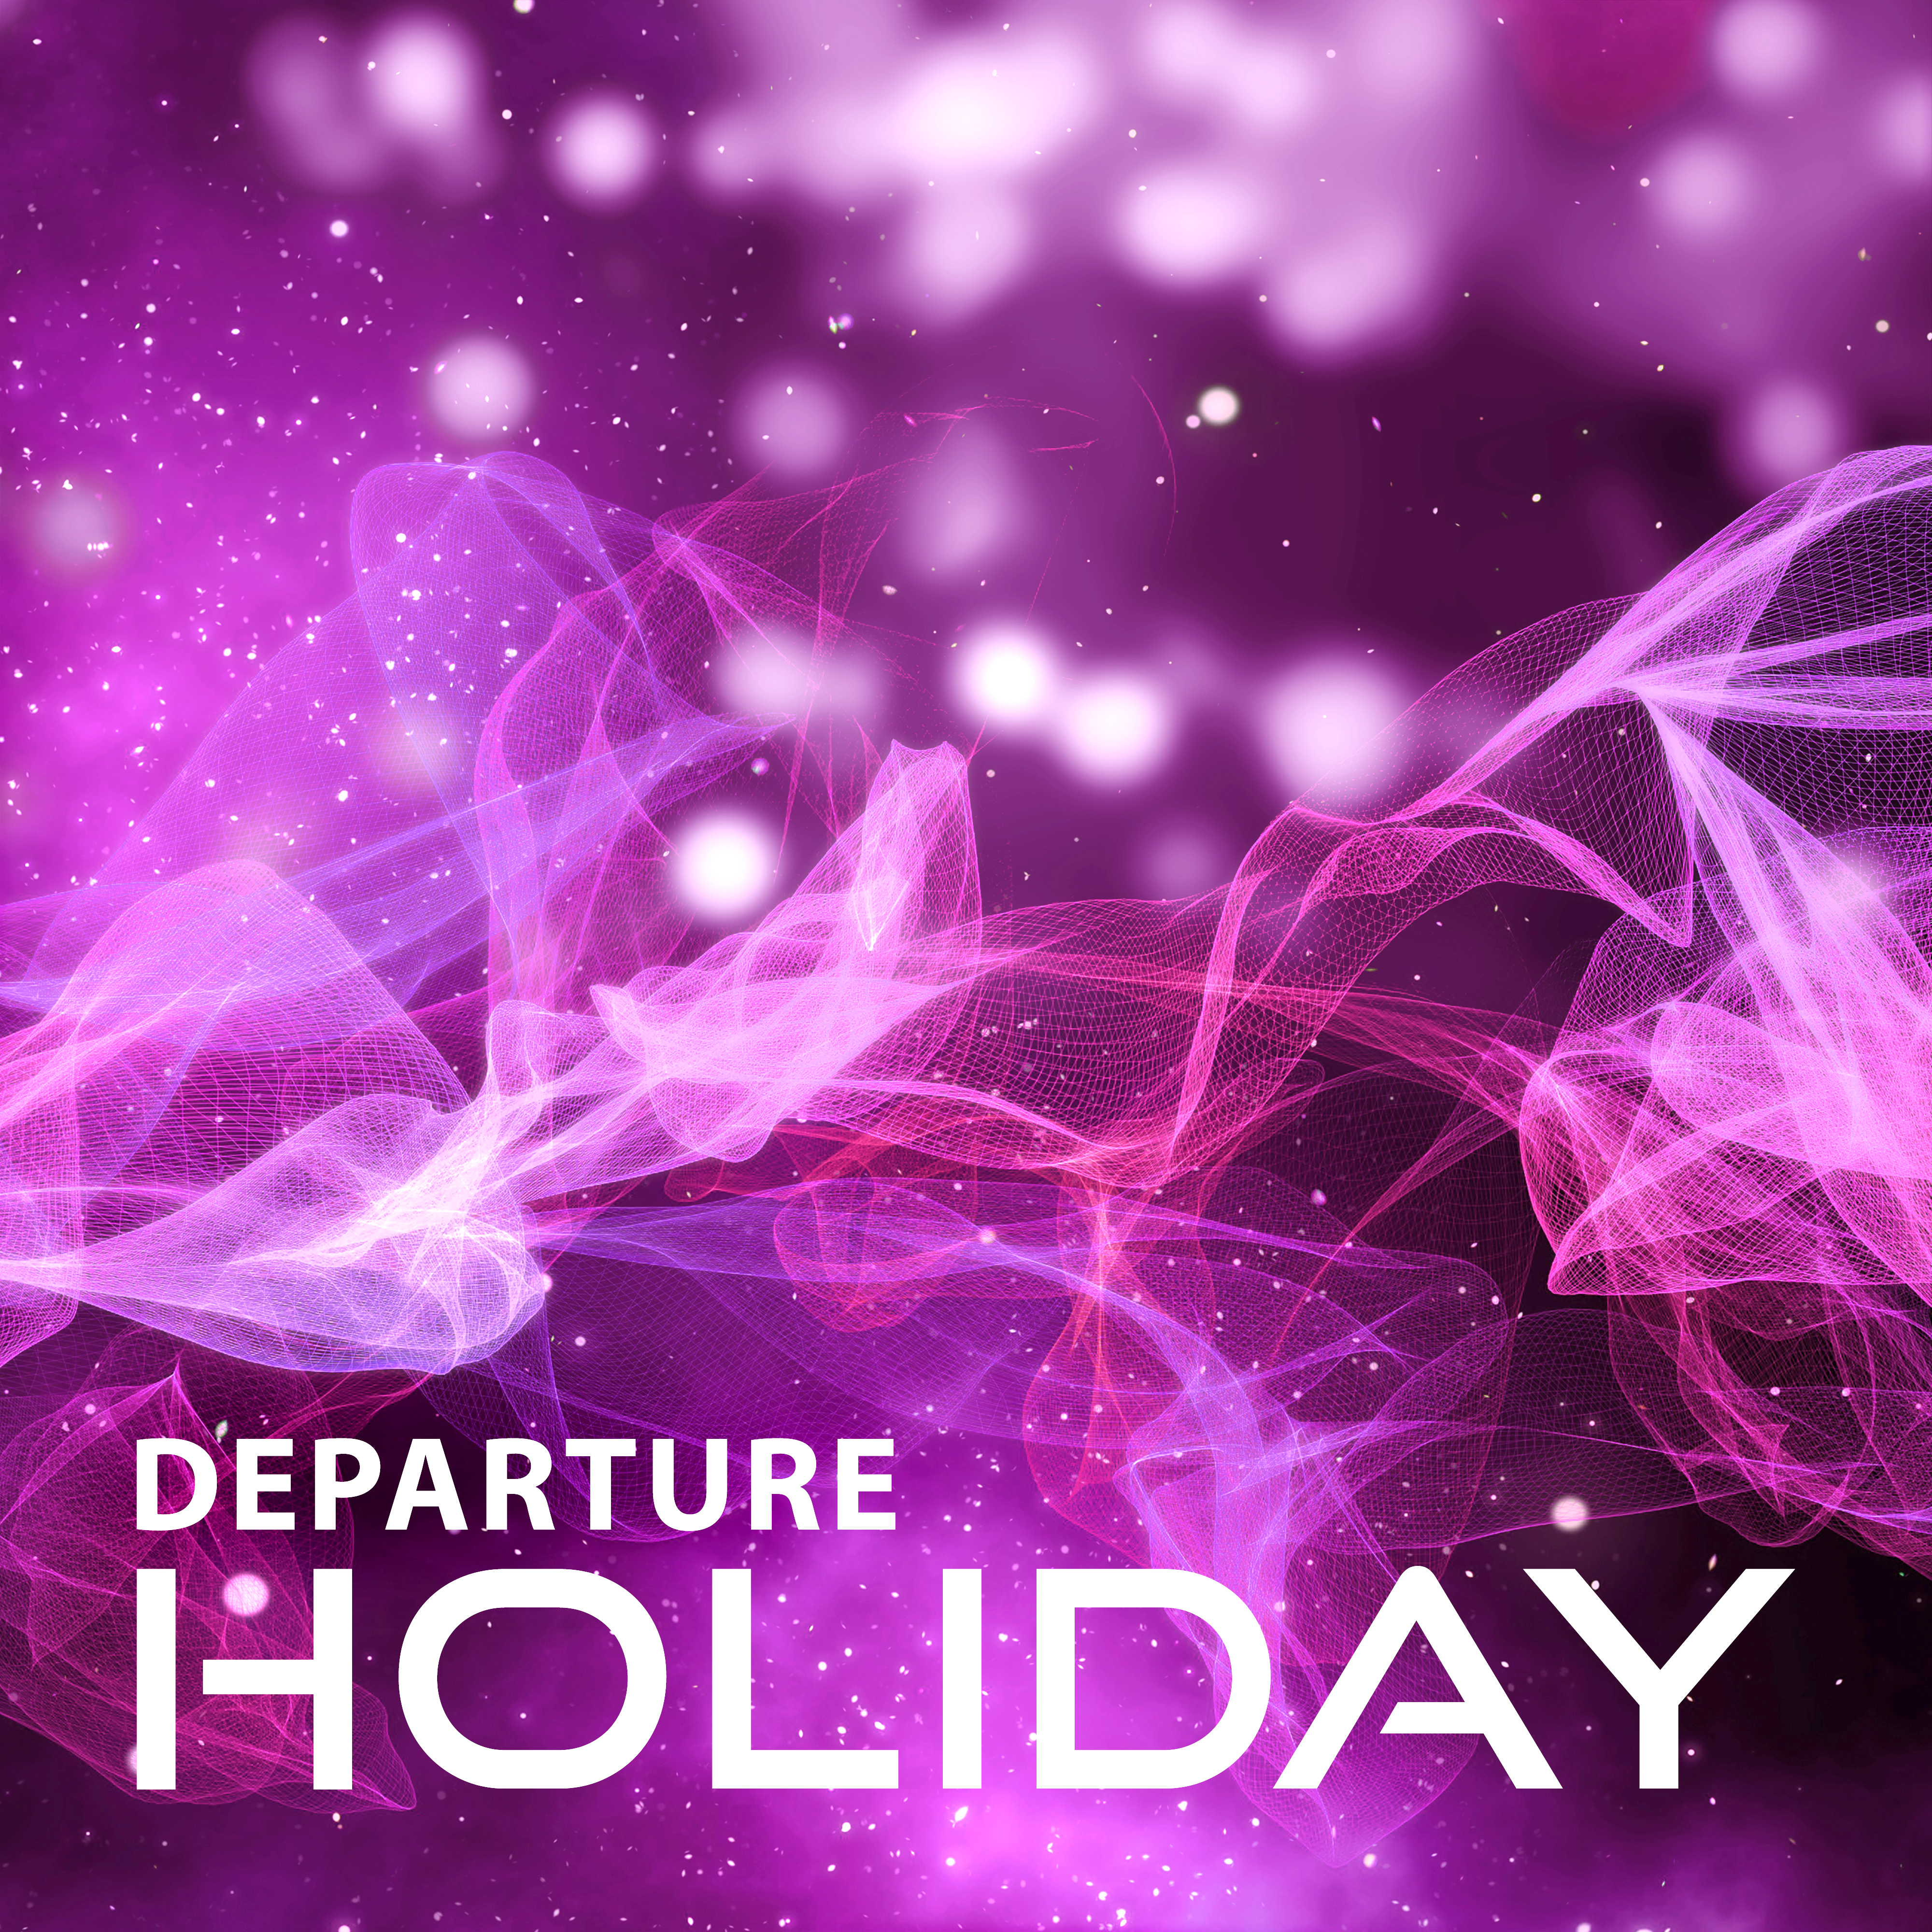 Departure Holiday - Travel Bag, New Swimwear, Straw, Good Mood, Filtration Drink, Juicy Fruit, Best Place